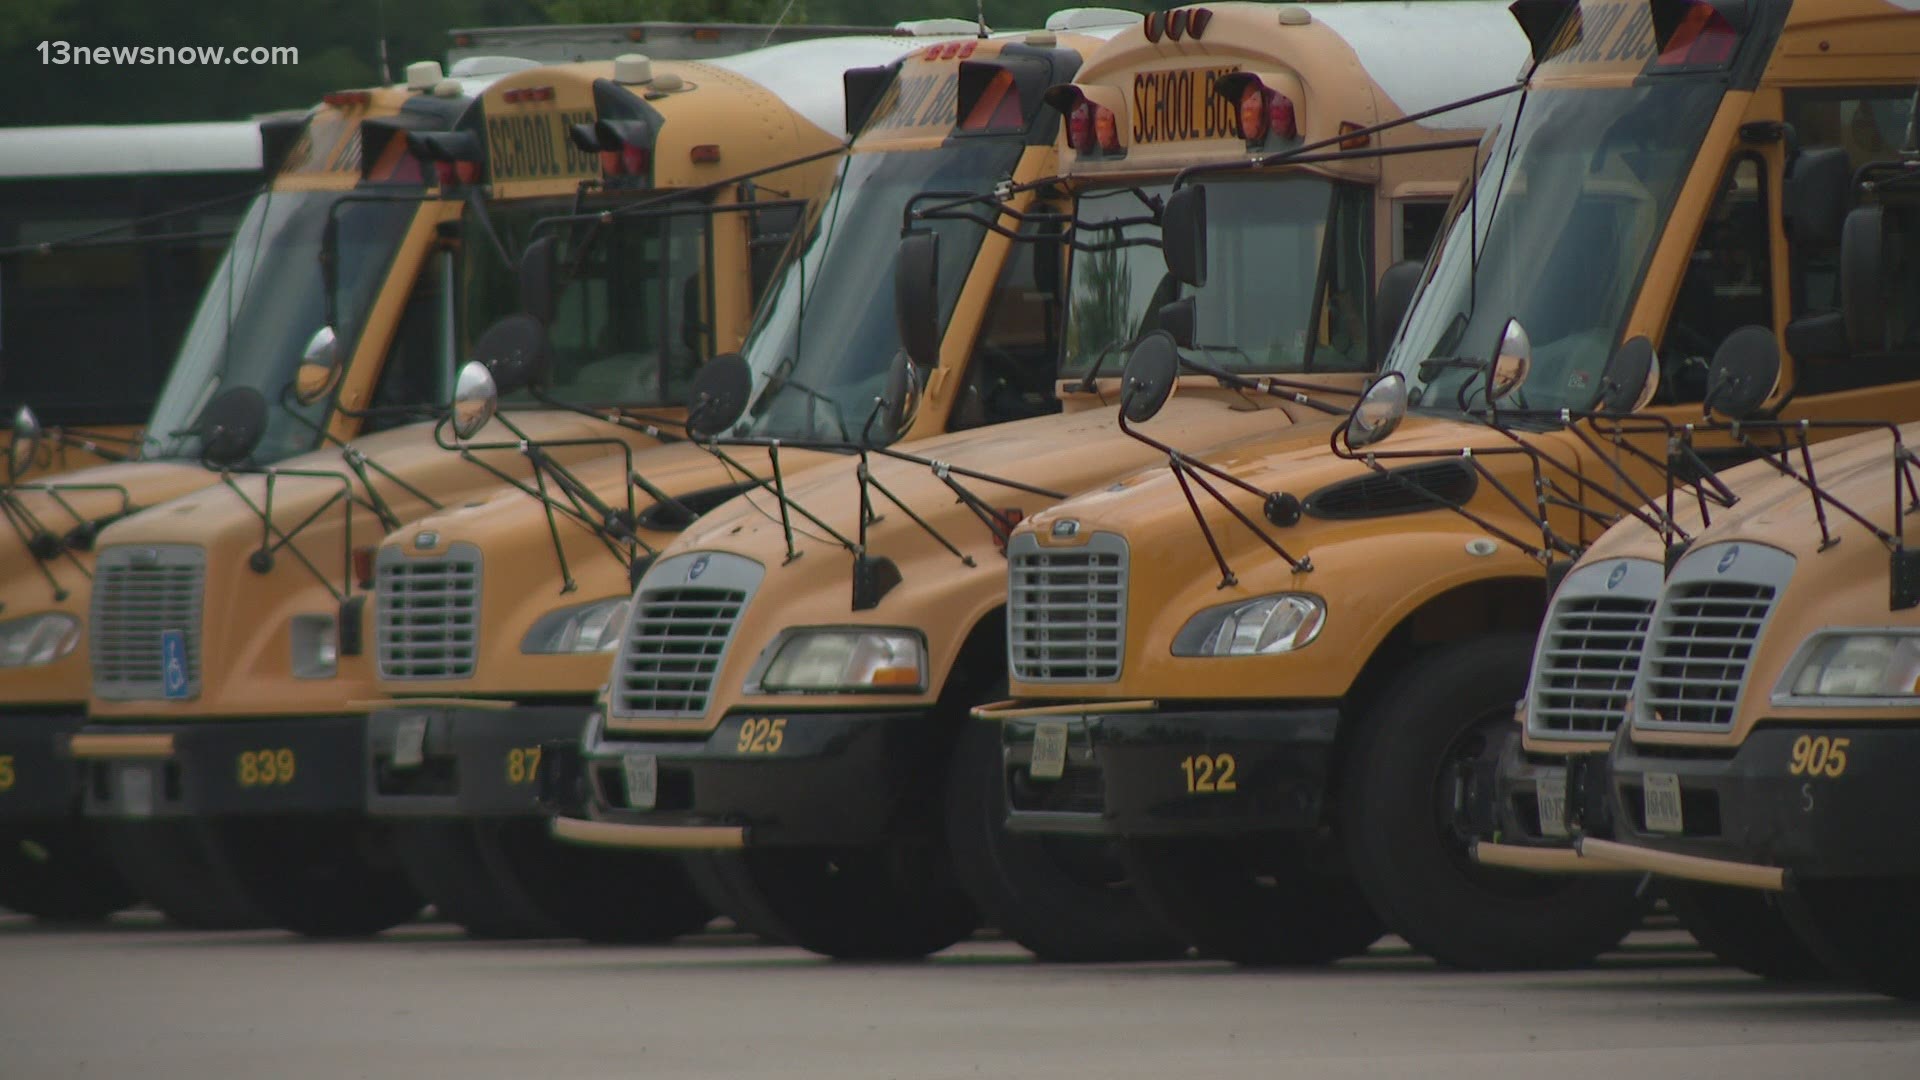 Possible delays and longer bus routes are just a few issues students in Hampton Roads could face next school year.